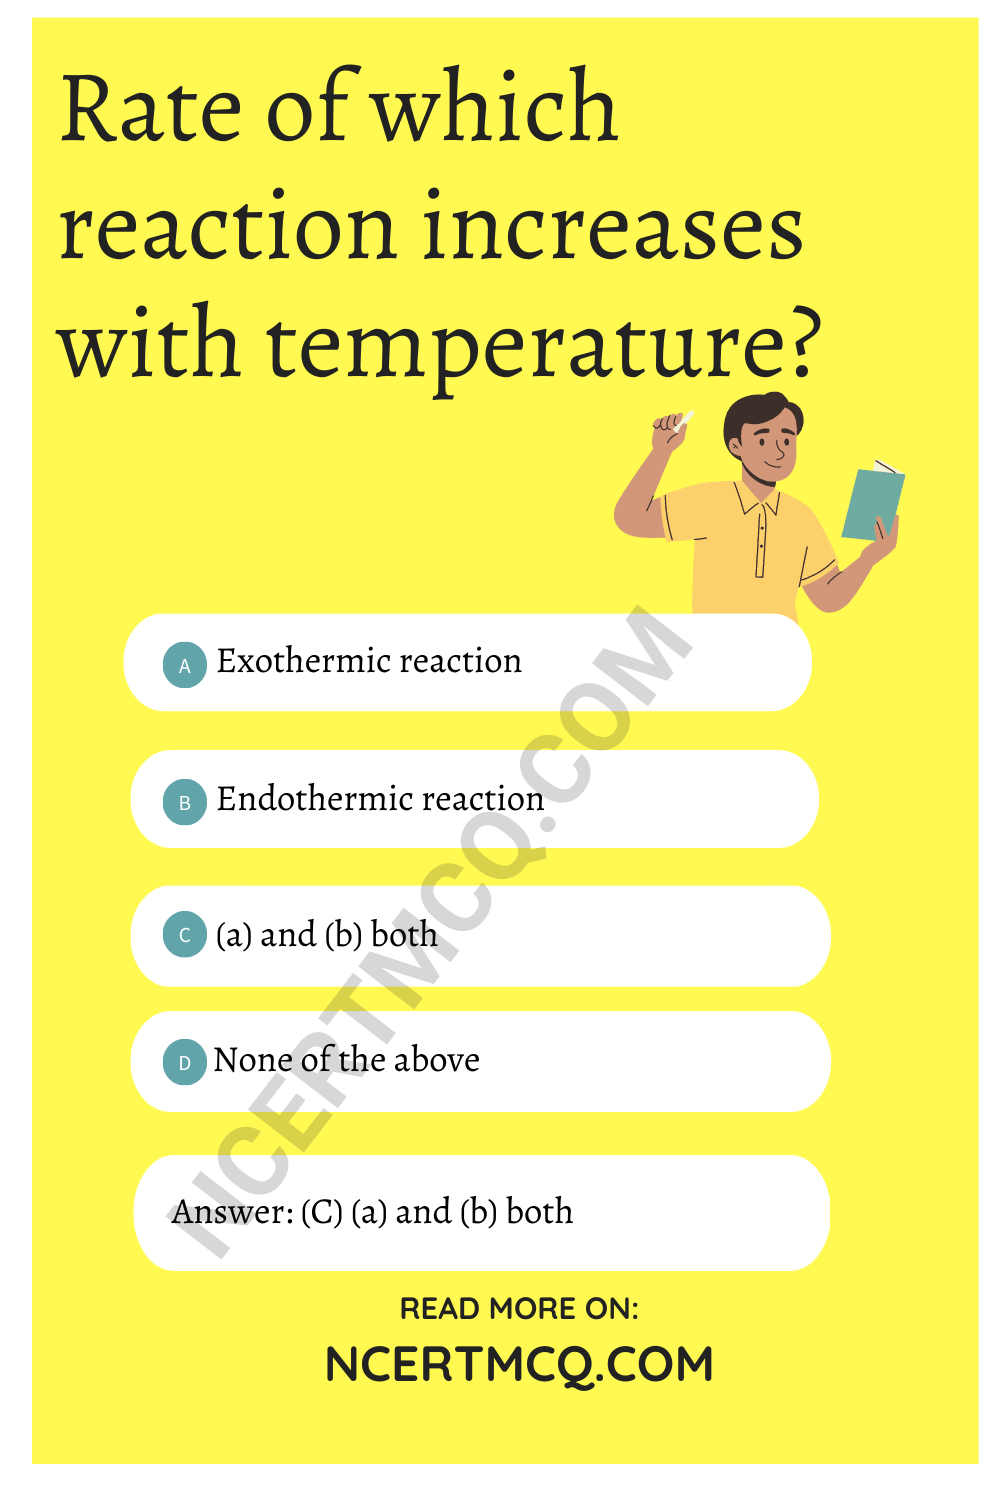 Rate of which reaction increases with temperature?